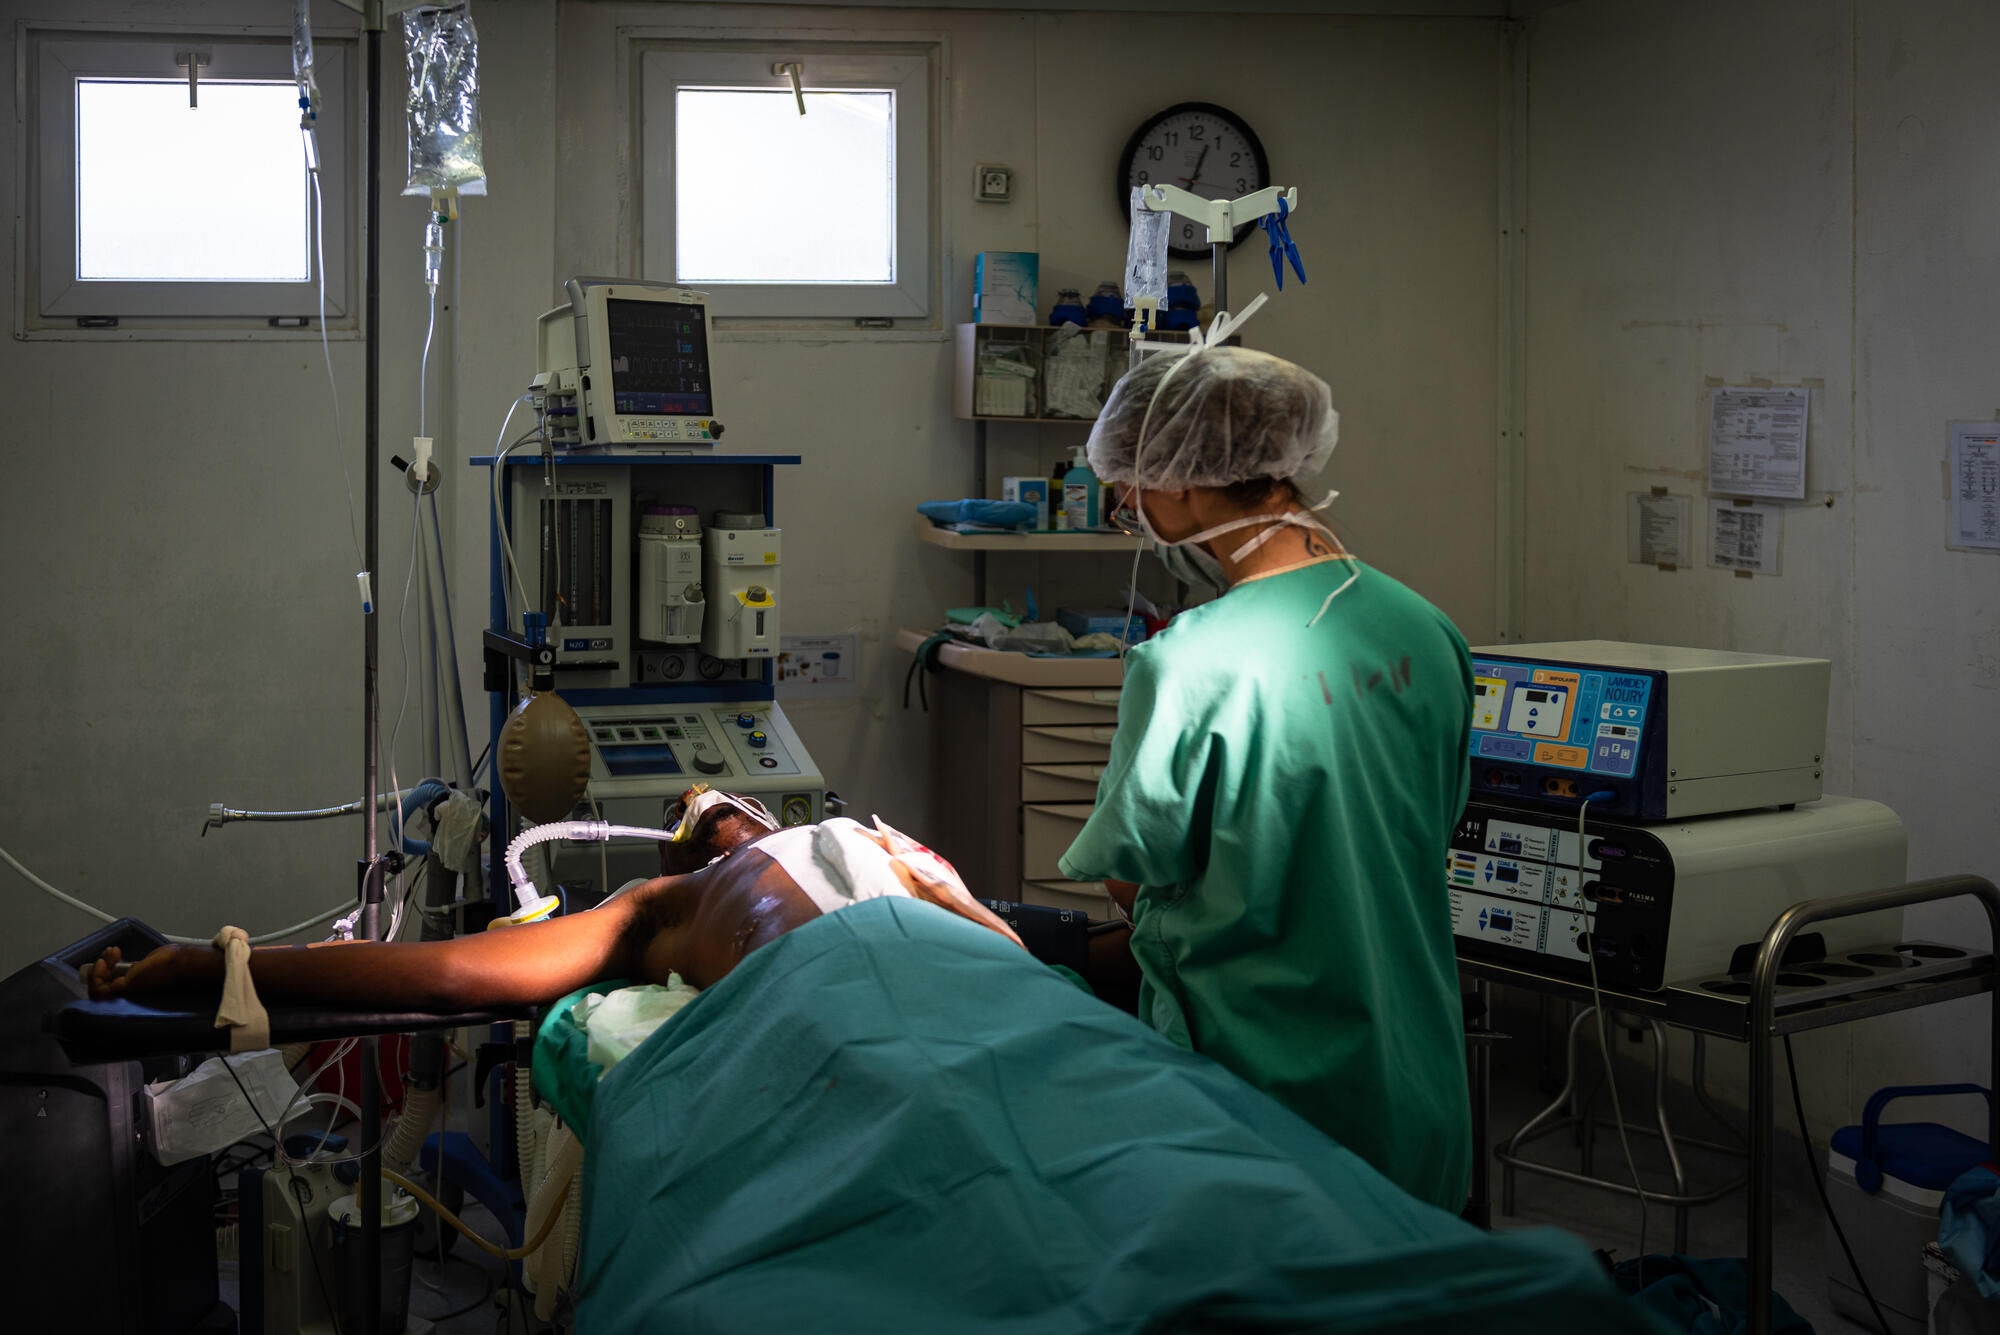 At Tabarre Hospital, an MSF surgical team prepare to operate on a patient with a gunshot wound